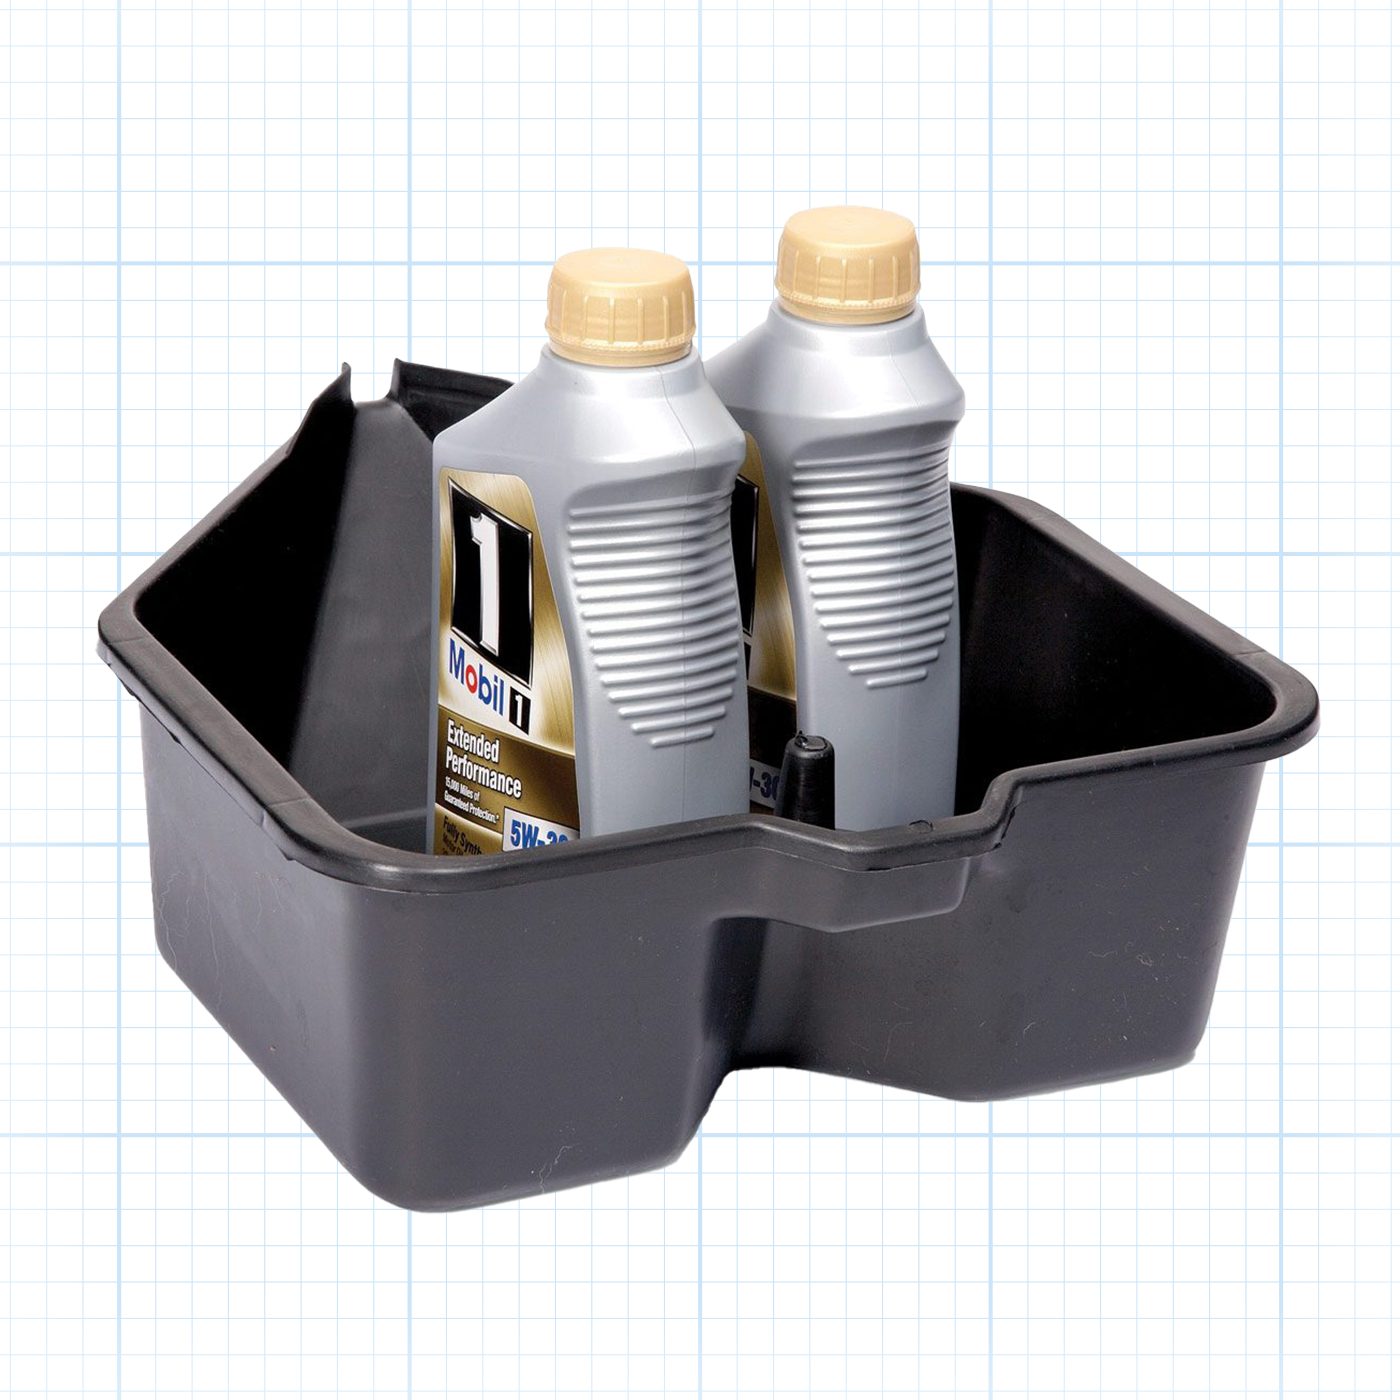 A black, rectangular oil drain pan with a spout on one side, containing two bottles of motor oil with beige caps and silver labels, placed on a grid-patterned background.